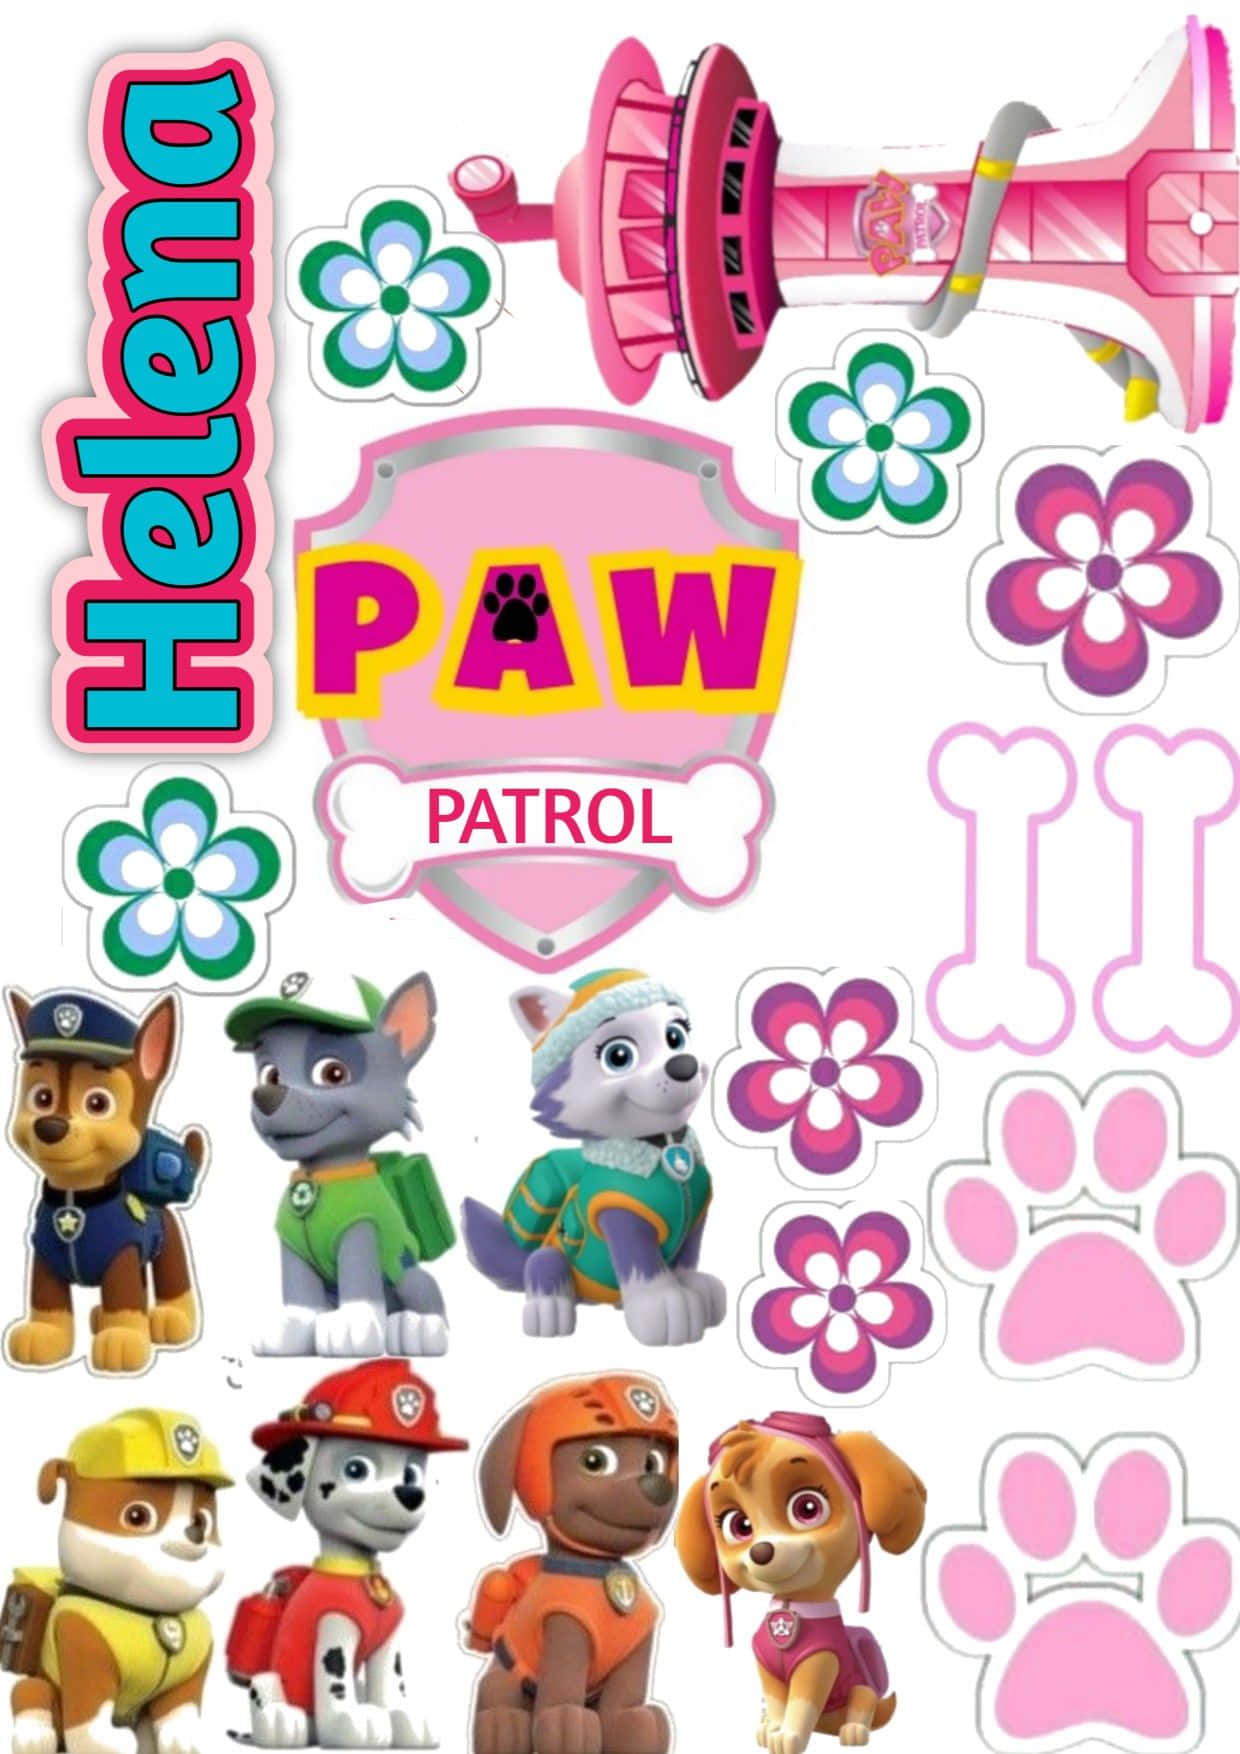 "Adventure is out there with Skye from Paw Patrol!" Wallpaper